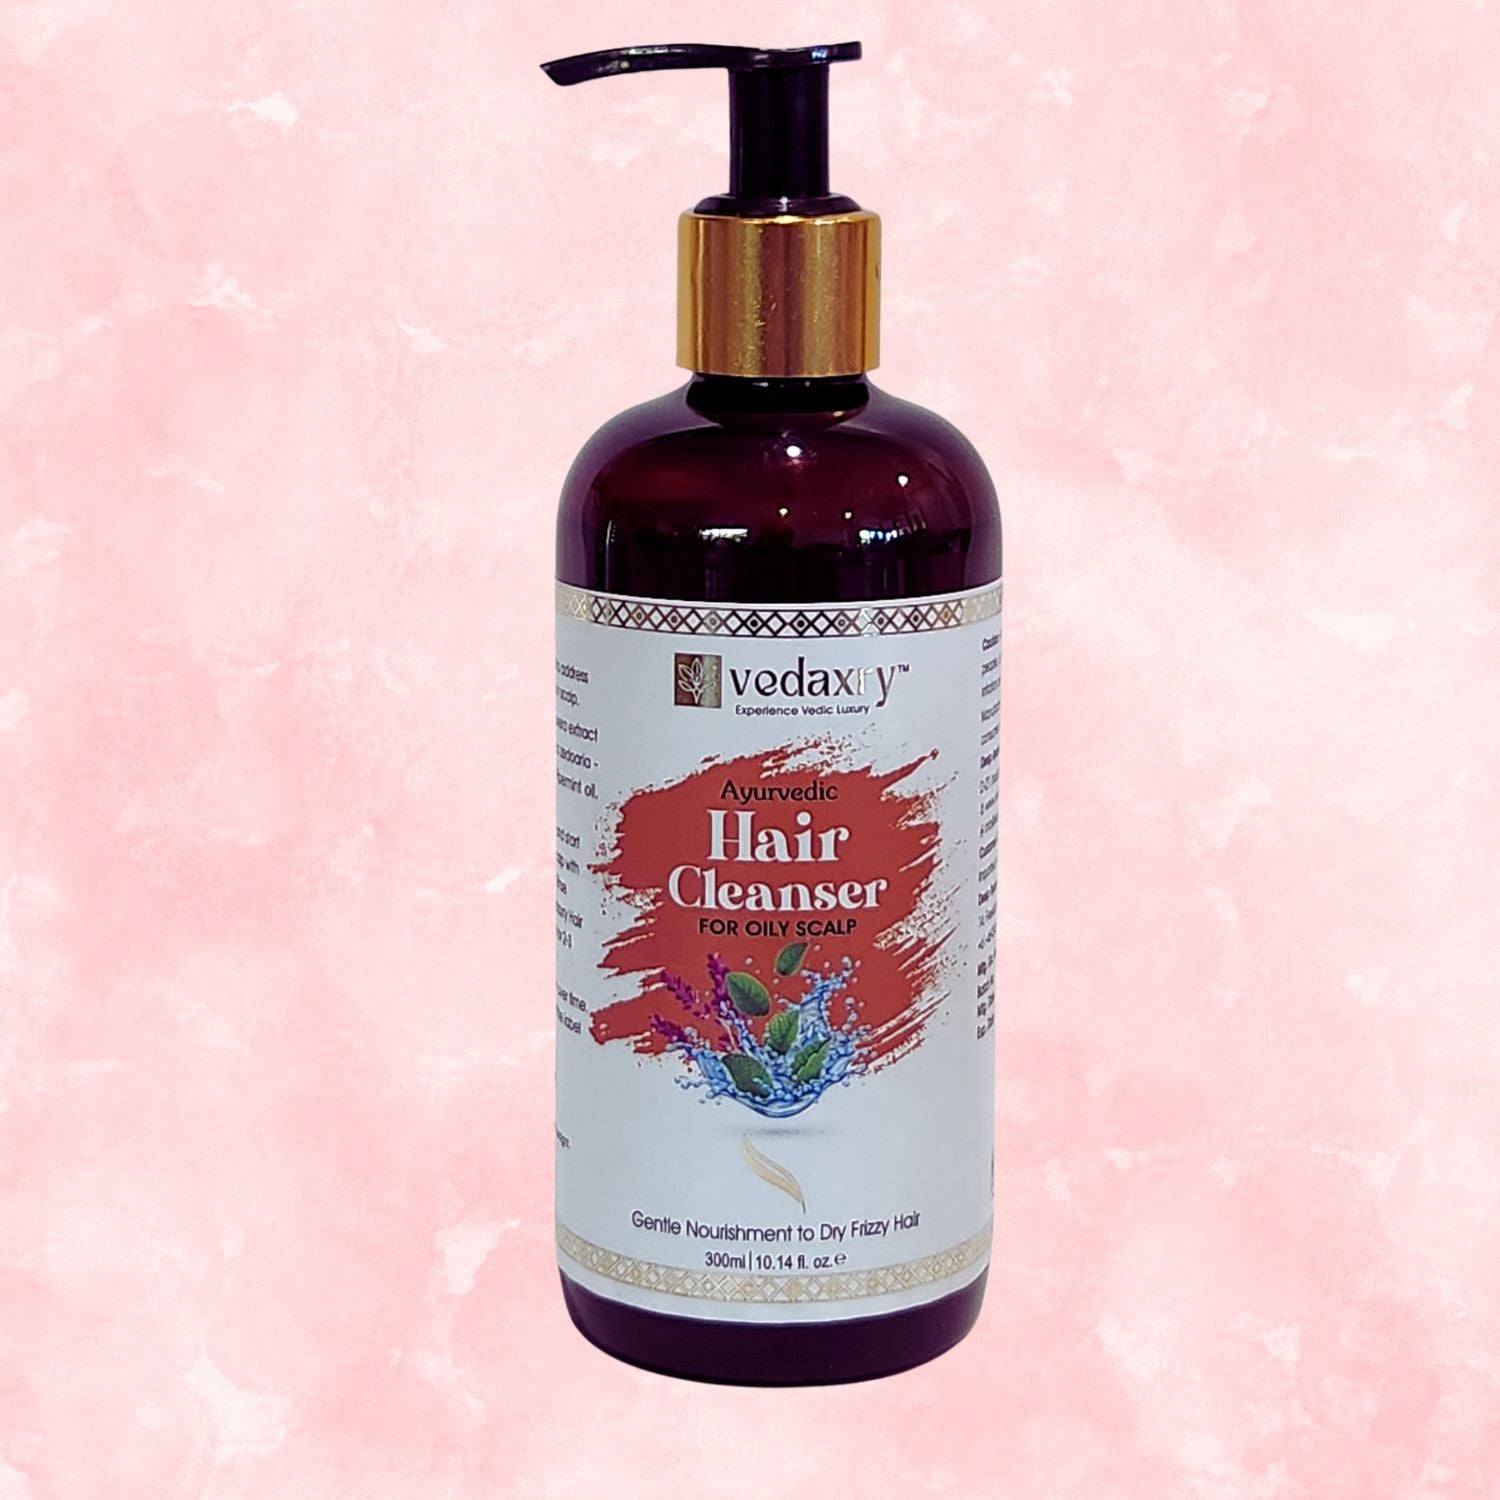 vedaxry hair cleanser for normal hair